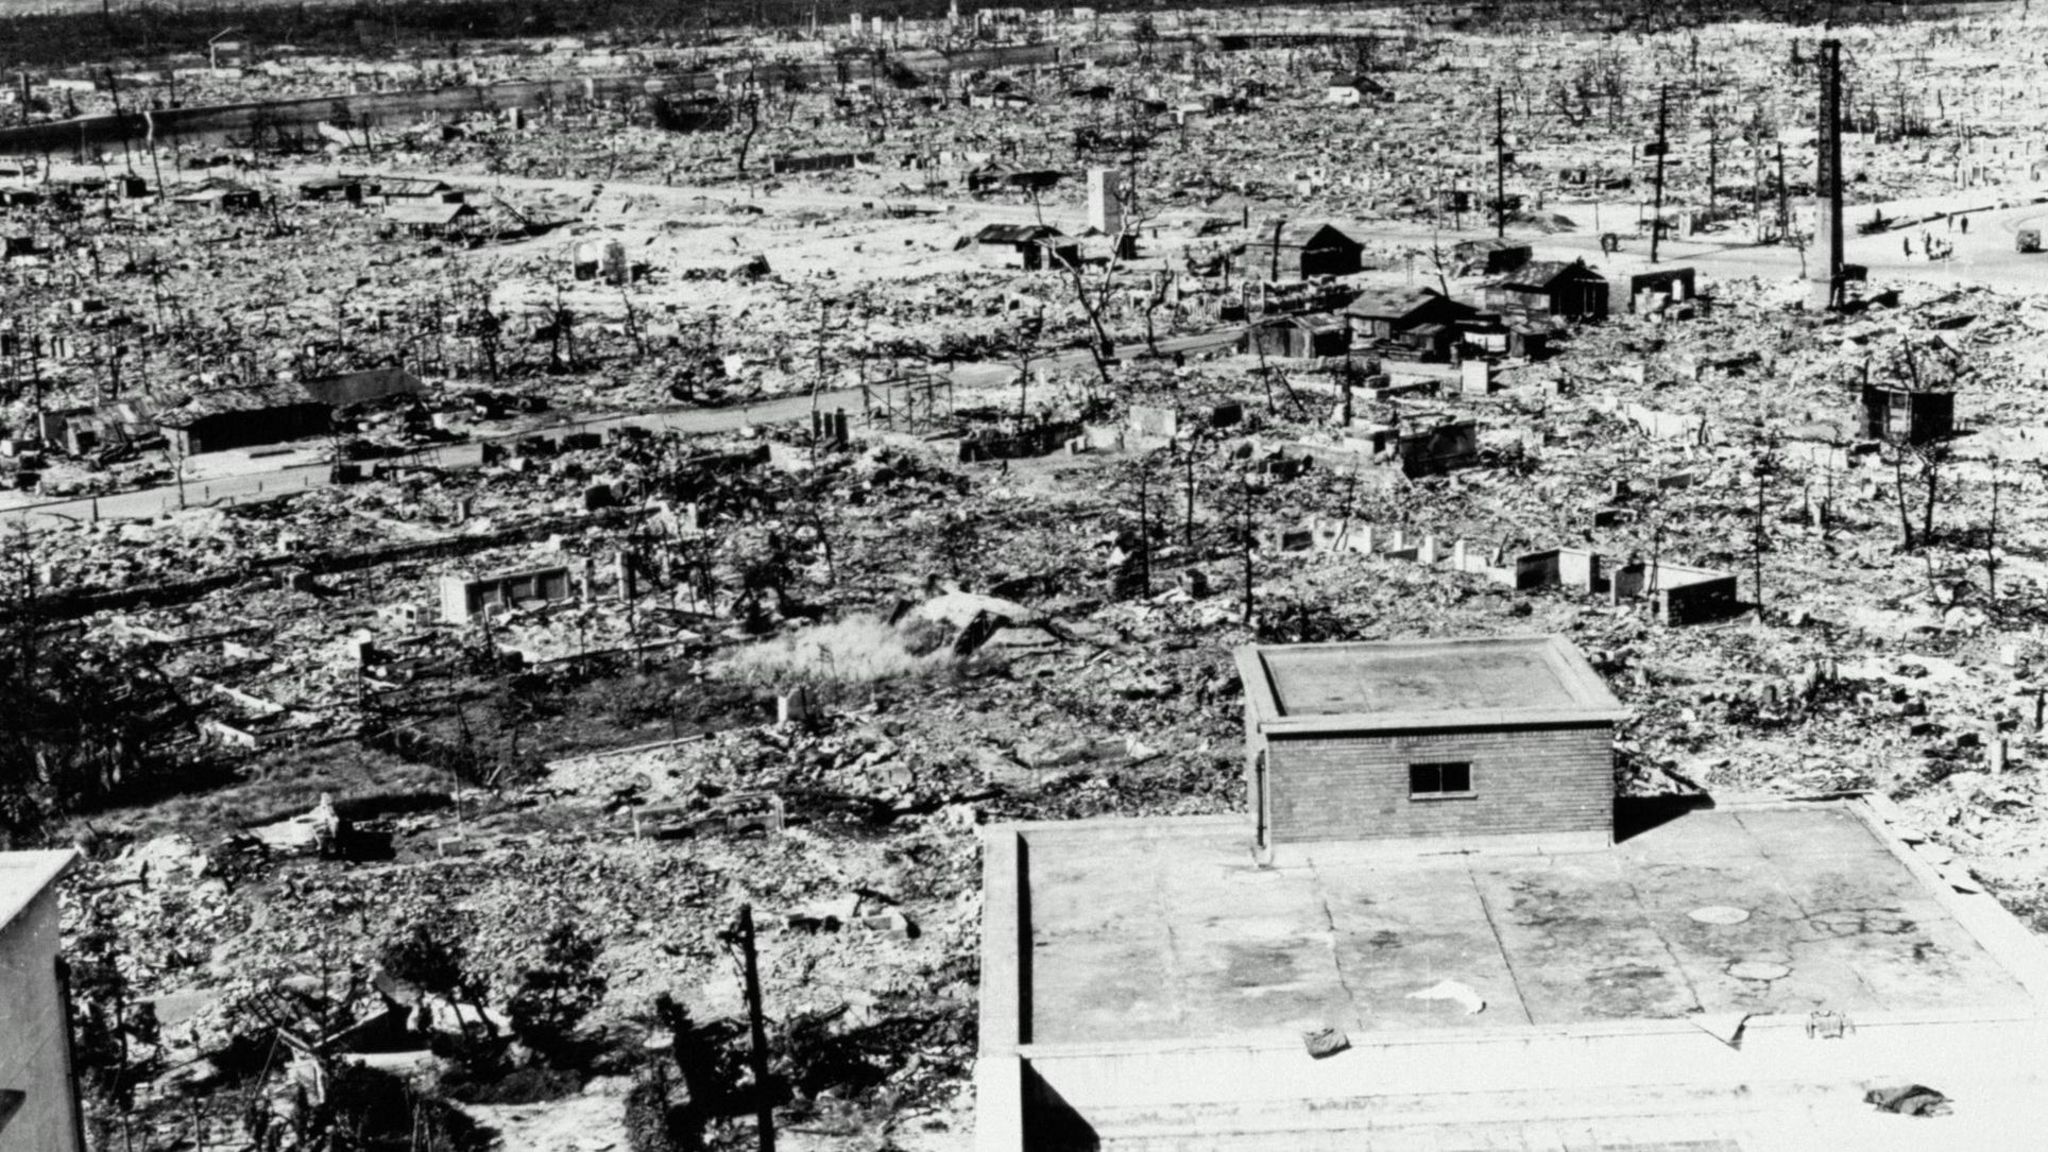 The aftermath of the Hiroshima bombing, Japan,1945